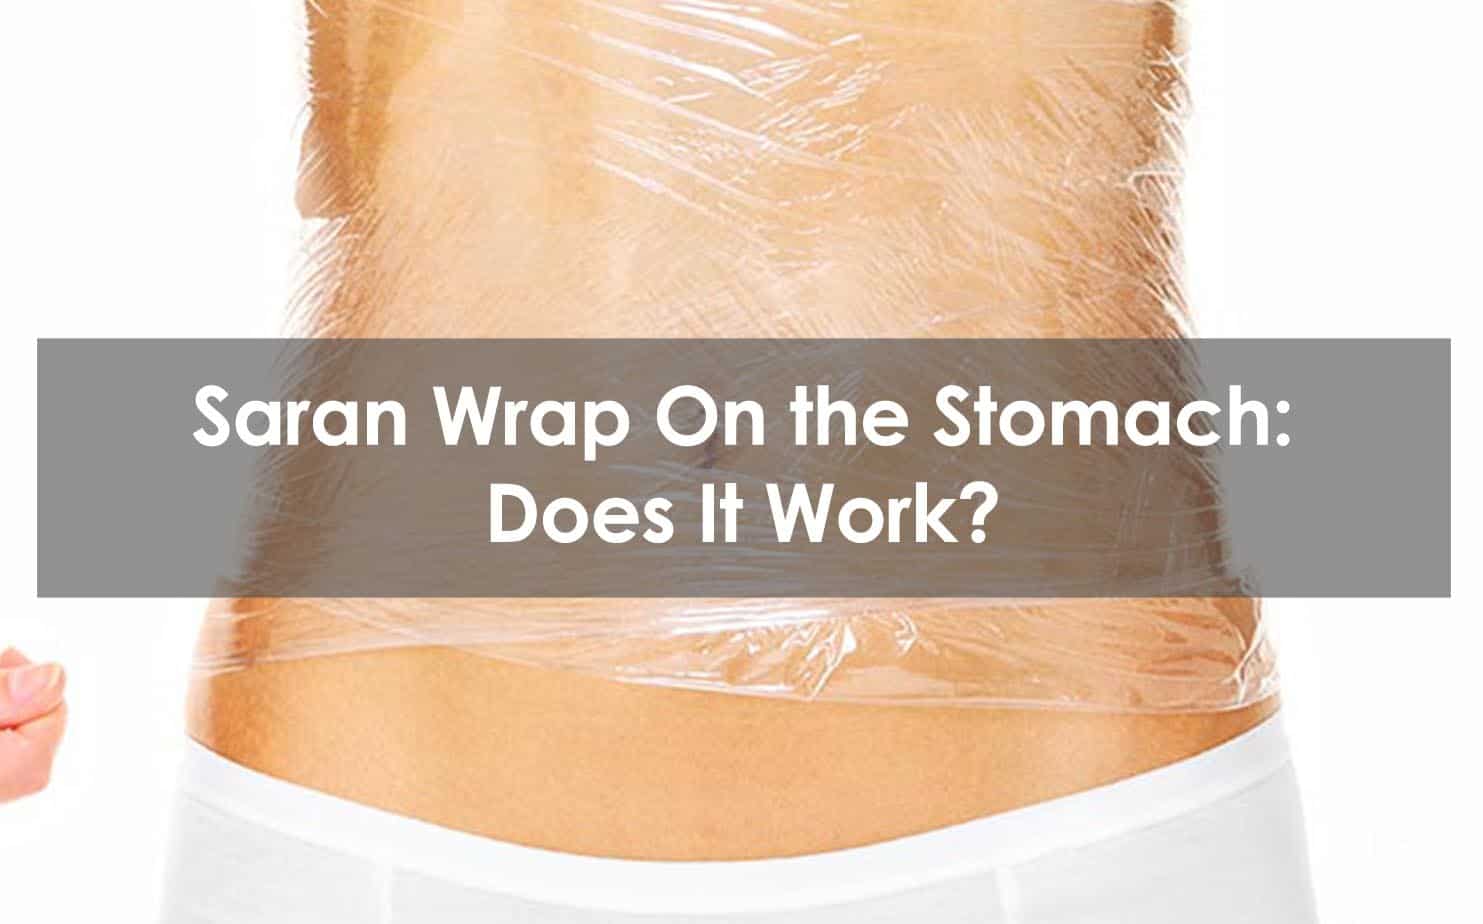 https://www.gym-pact.com/wp-content/uploads/2022/02/saran-wrap-on-the-stomach.jpg